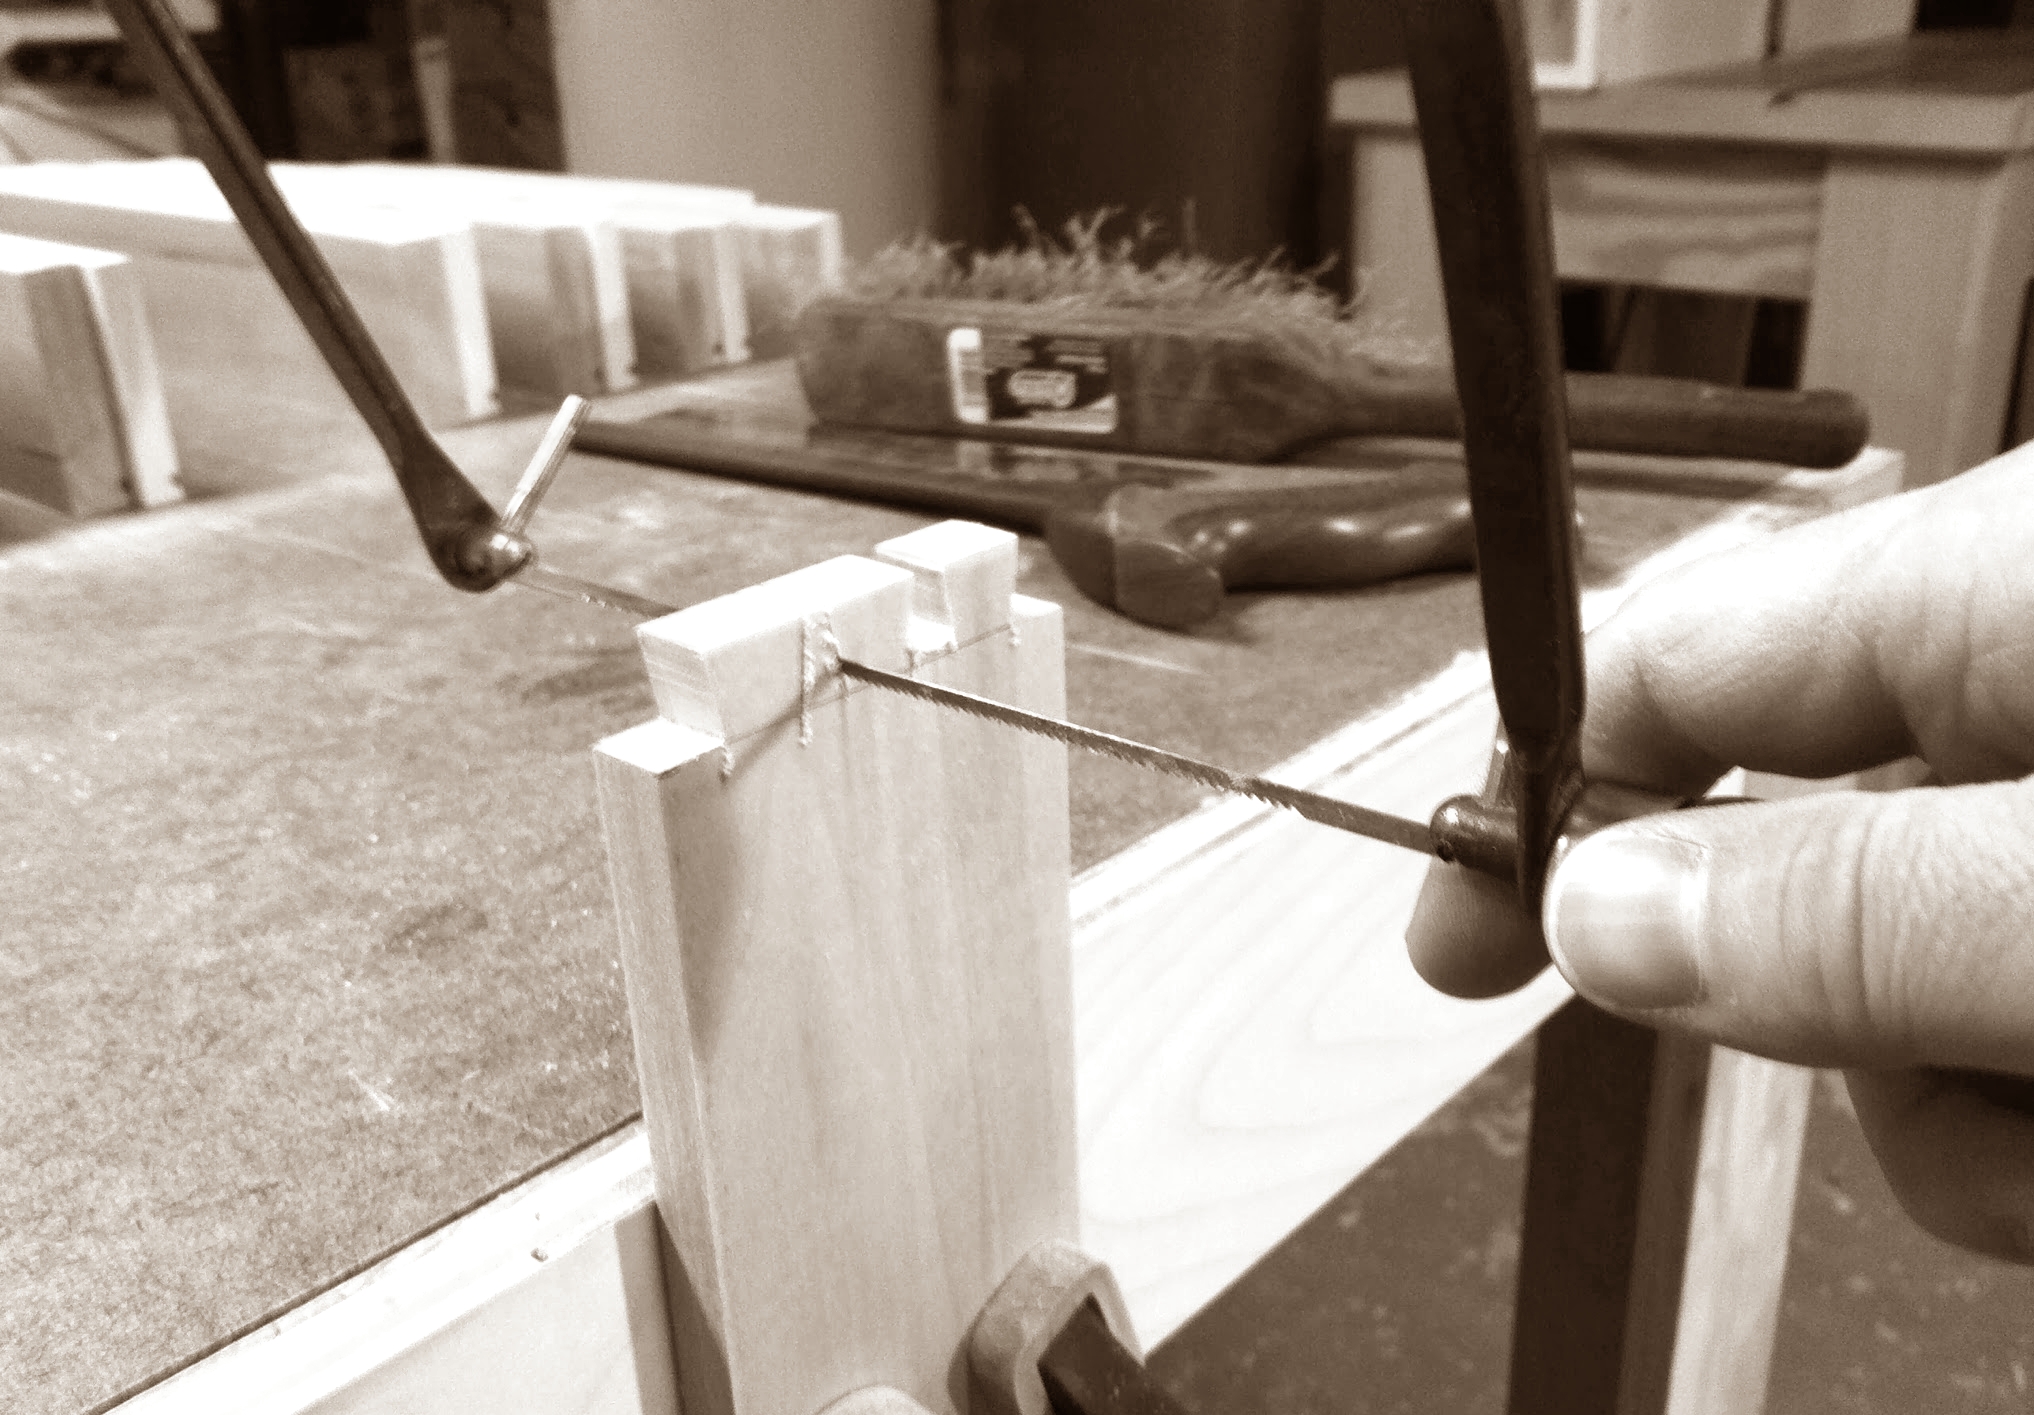 Using coping saw to cut waste between tails, staying just off the lines